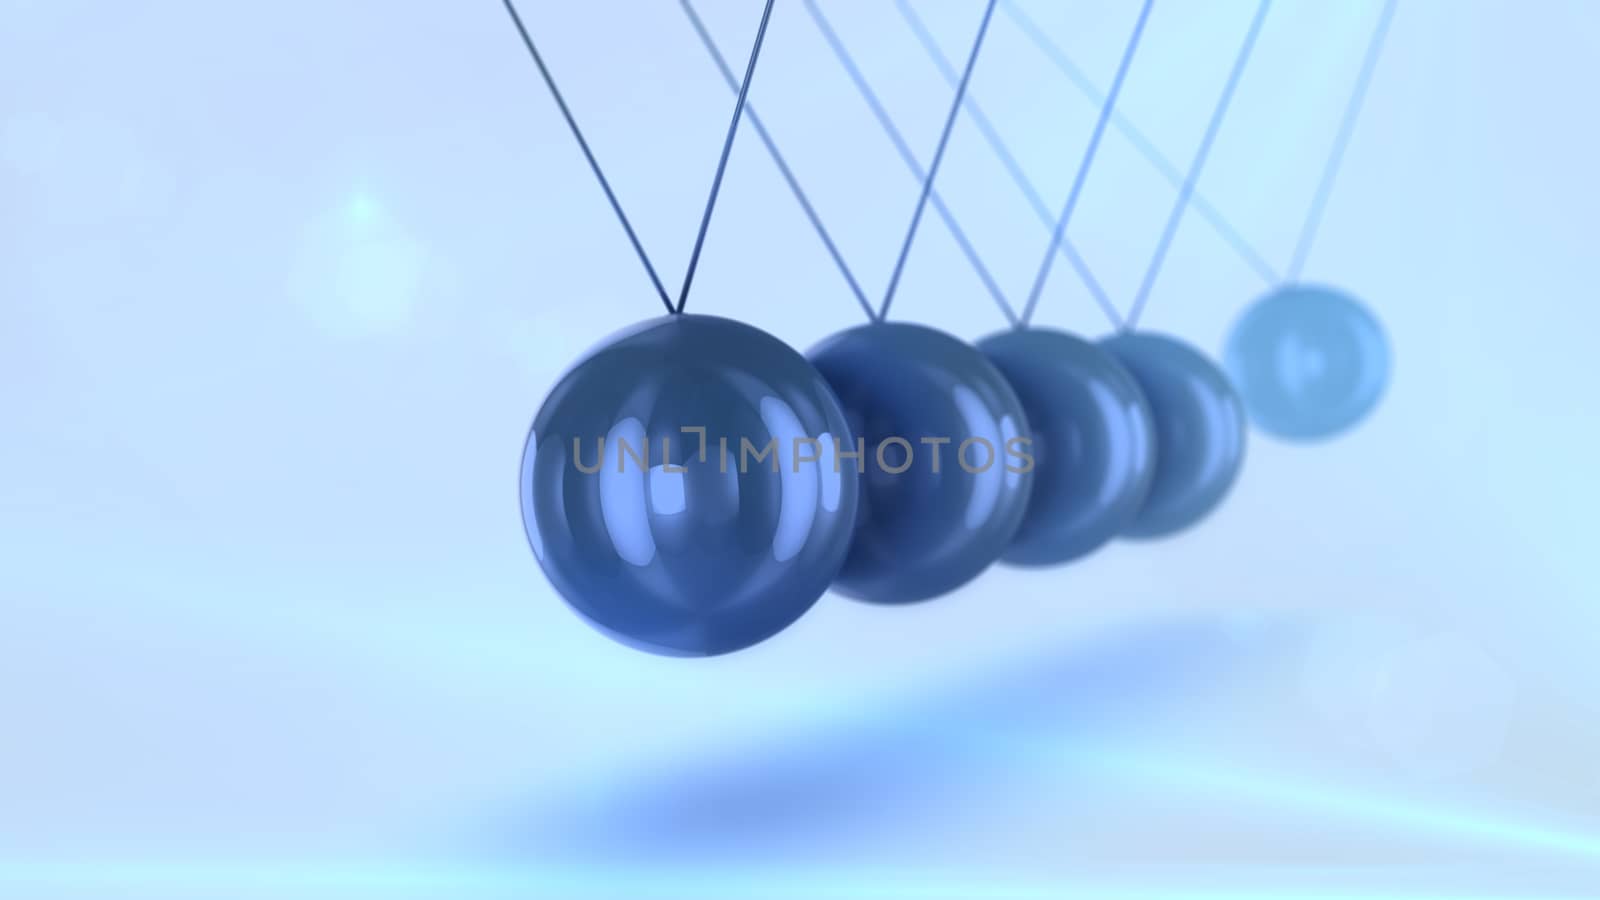 A stunning 3d illustration of black steel balls pendulum with waving diagonally beads beating each other in a light blue background with blurred spots. They look splendid, eternal and smart.